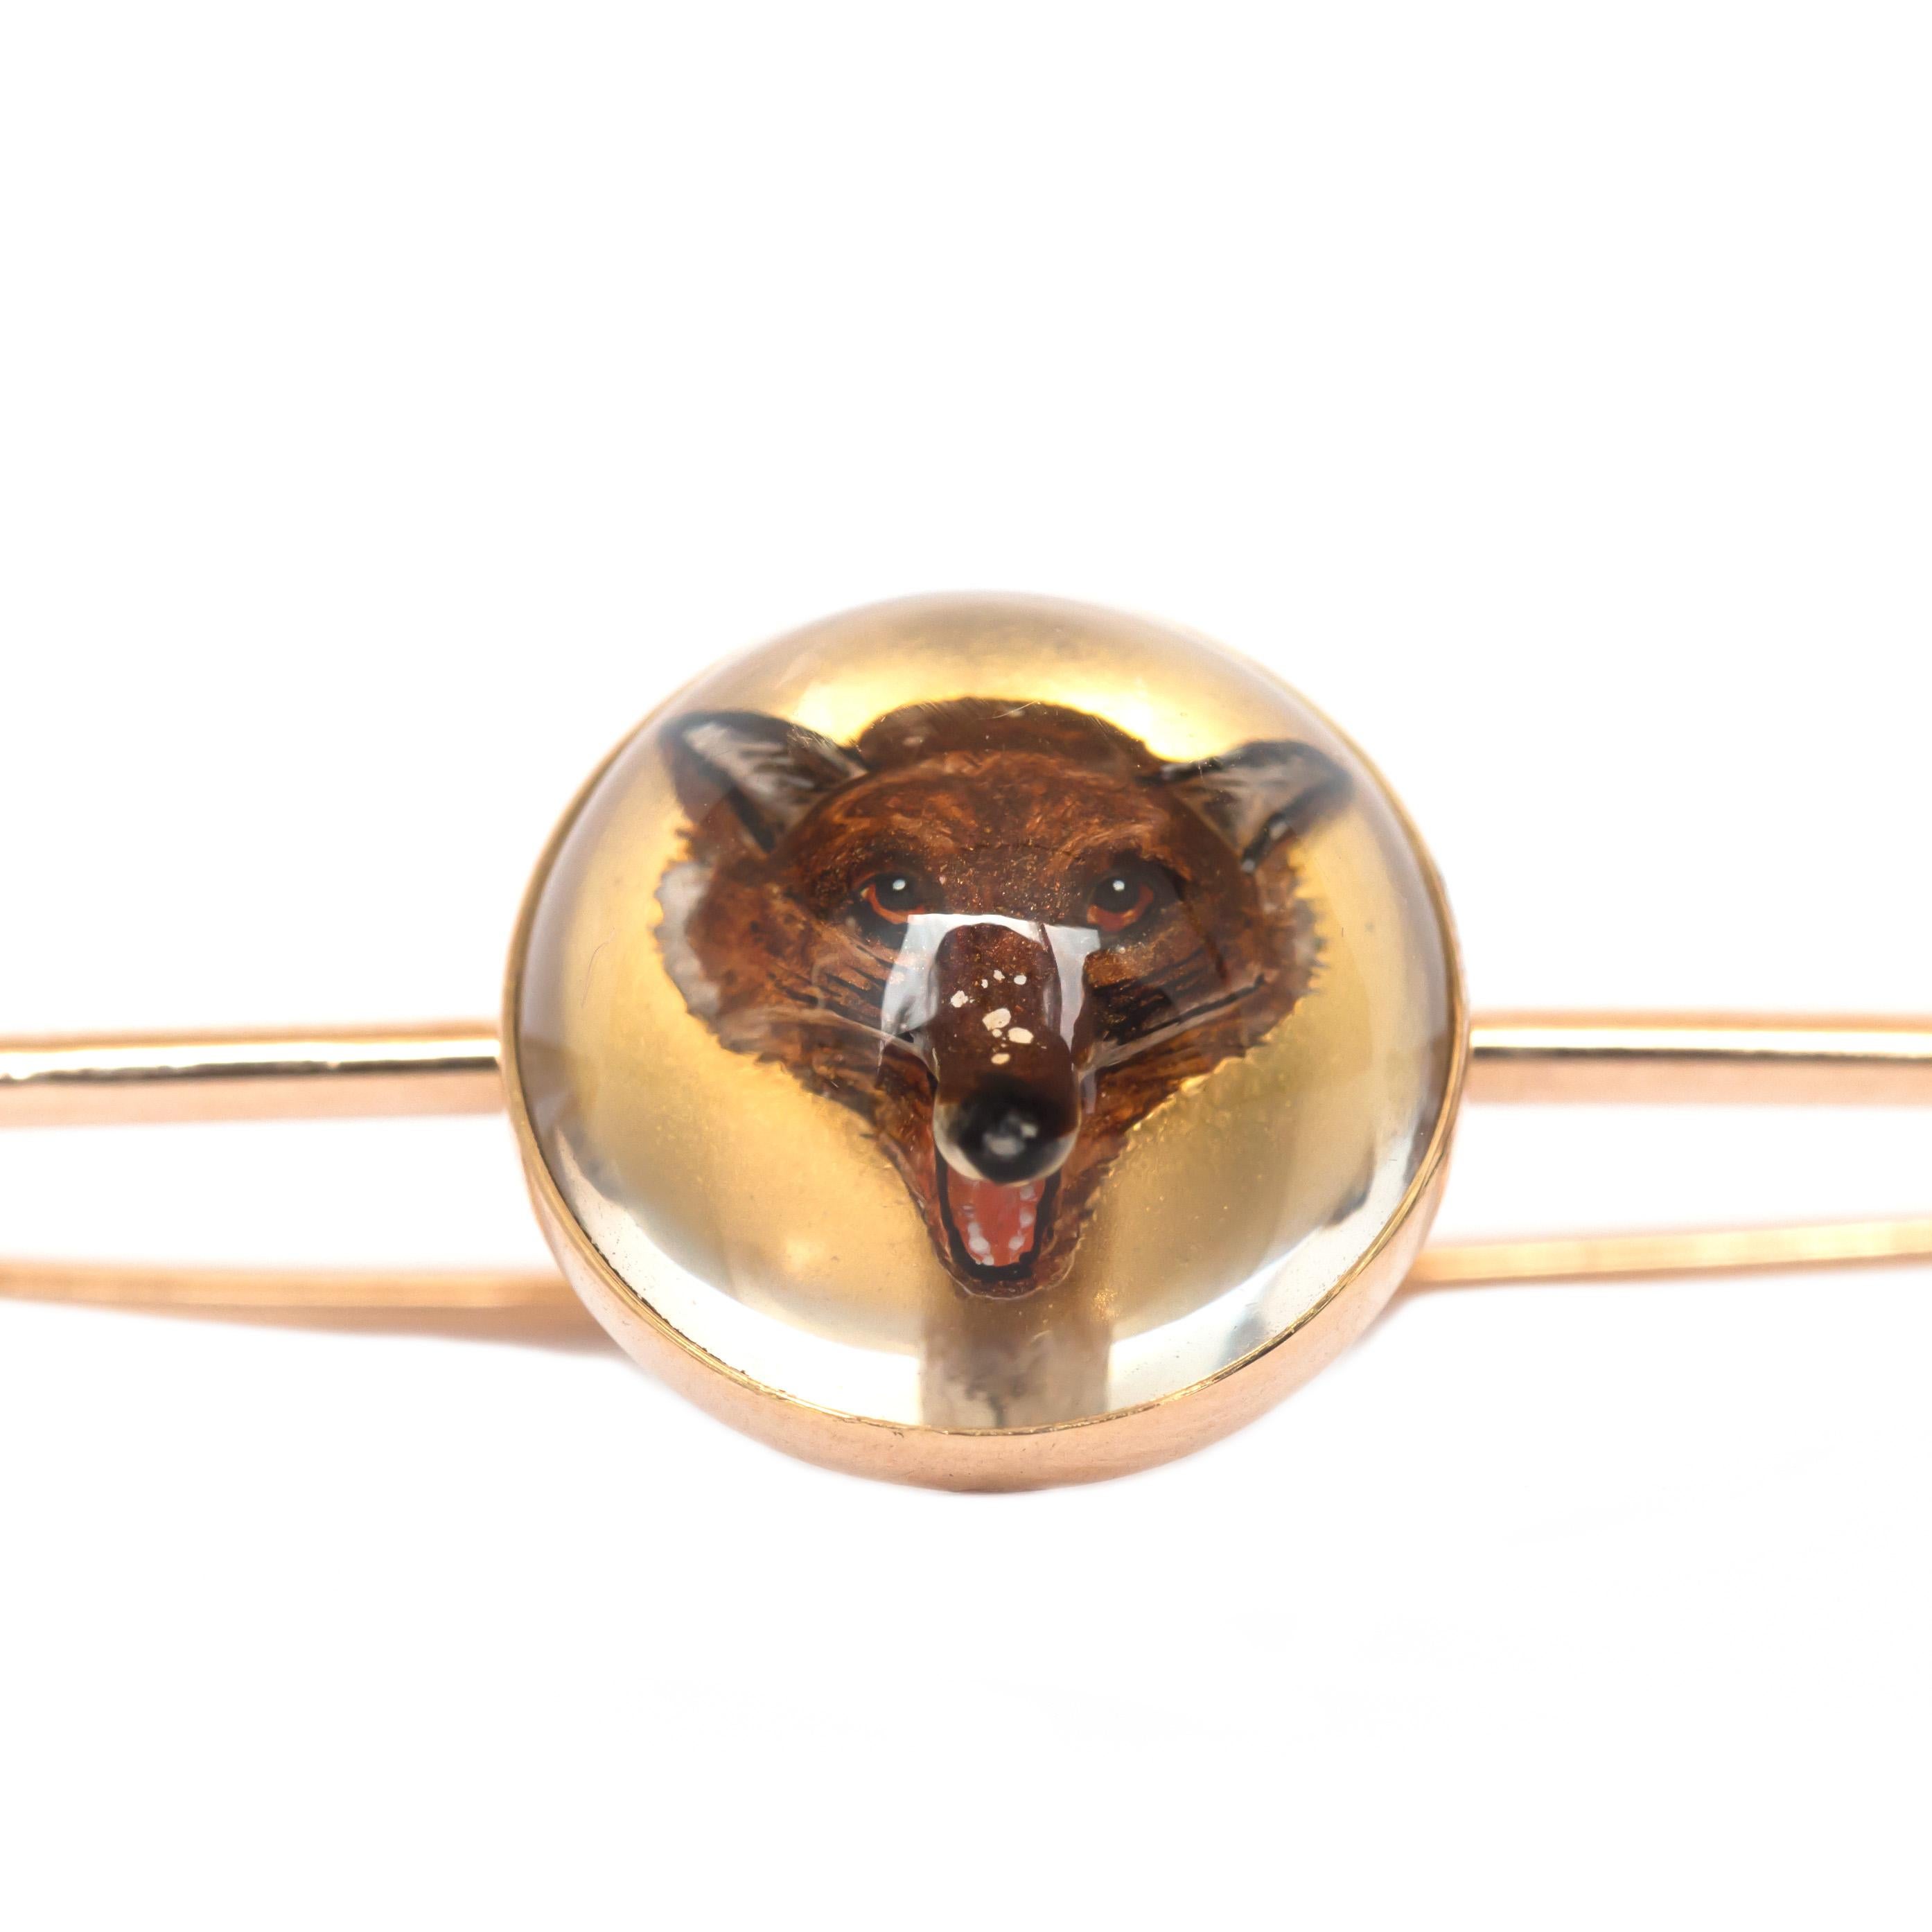 Item Details: 
Length: 2.13 inches 
Metal Type: 14 karat Yellow Gold 
Weight: 5.6 grams

Center Info: Glass with Fox 

Finger to Top of Stone Measurement: 2.54mm 